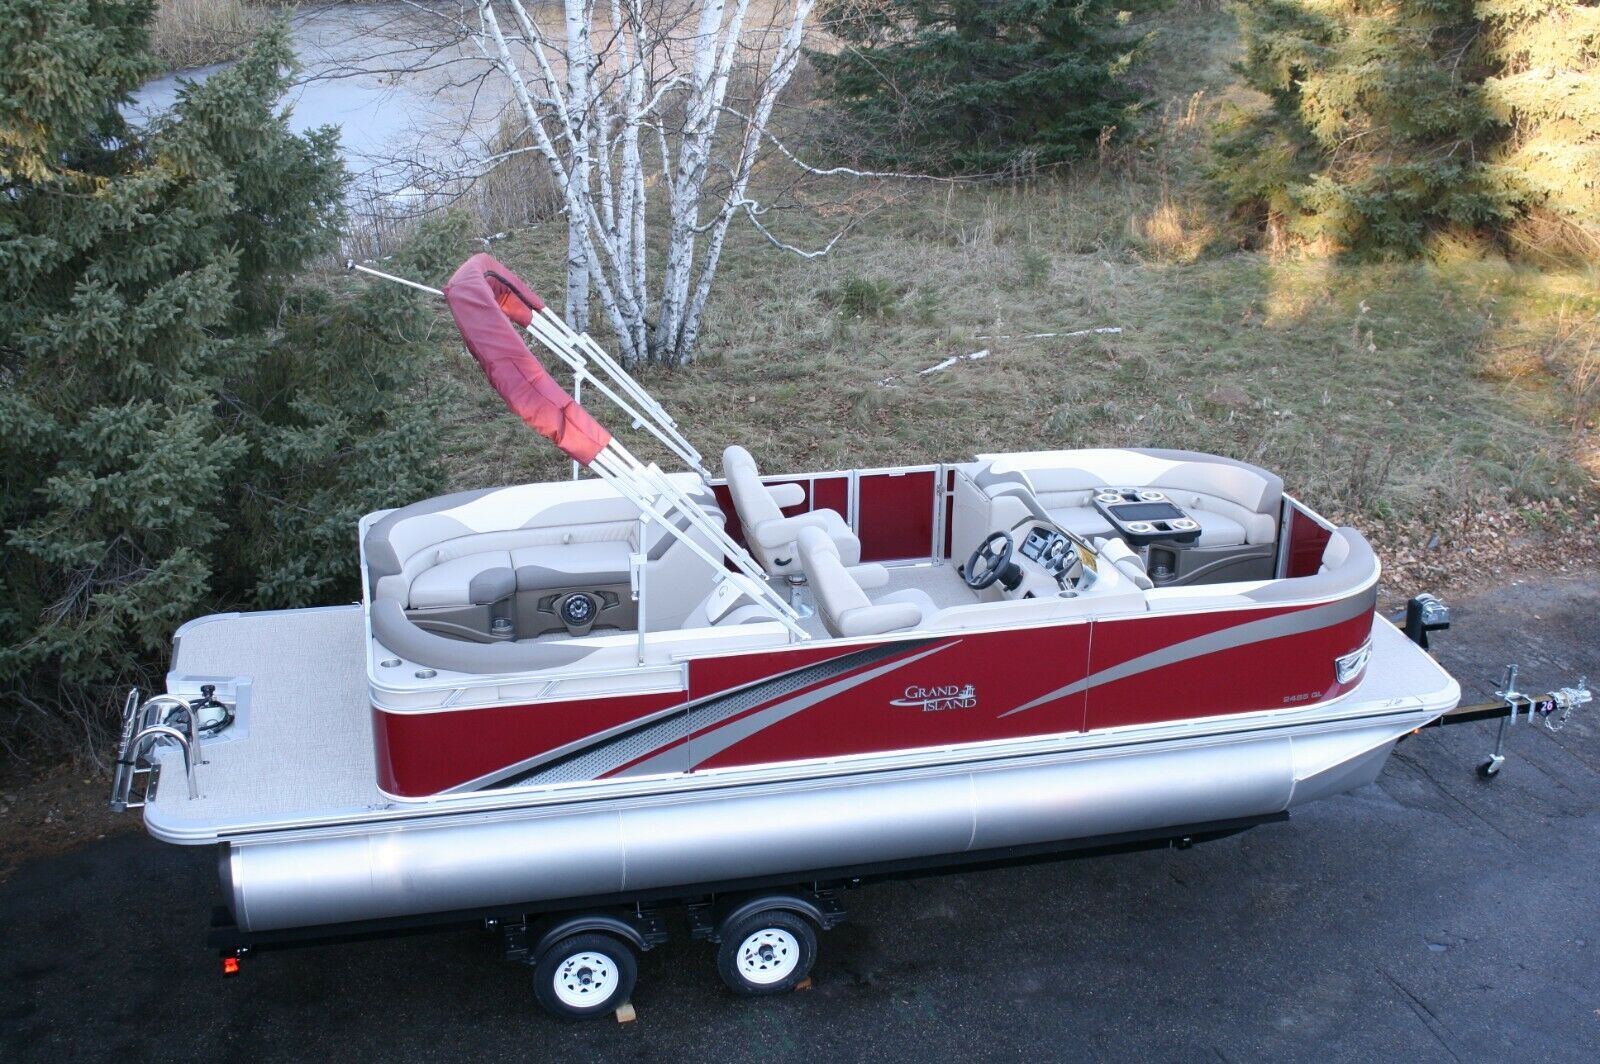 Two Tube-new 24 Ft Pontoon Boat With 115 Hp And Trailer